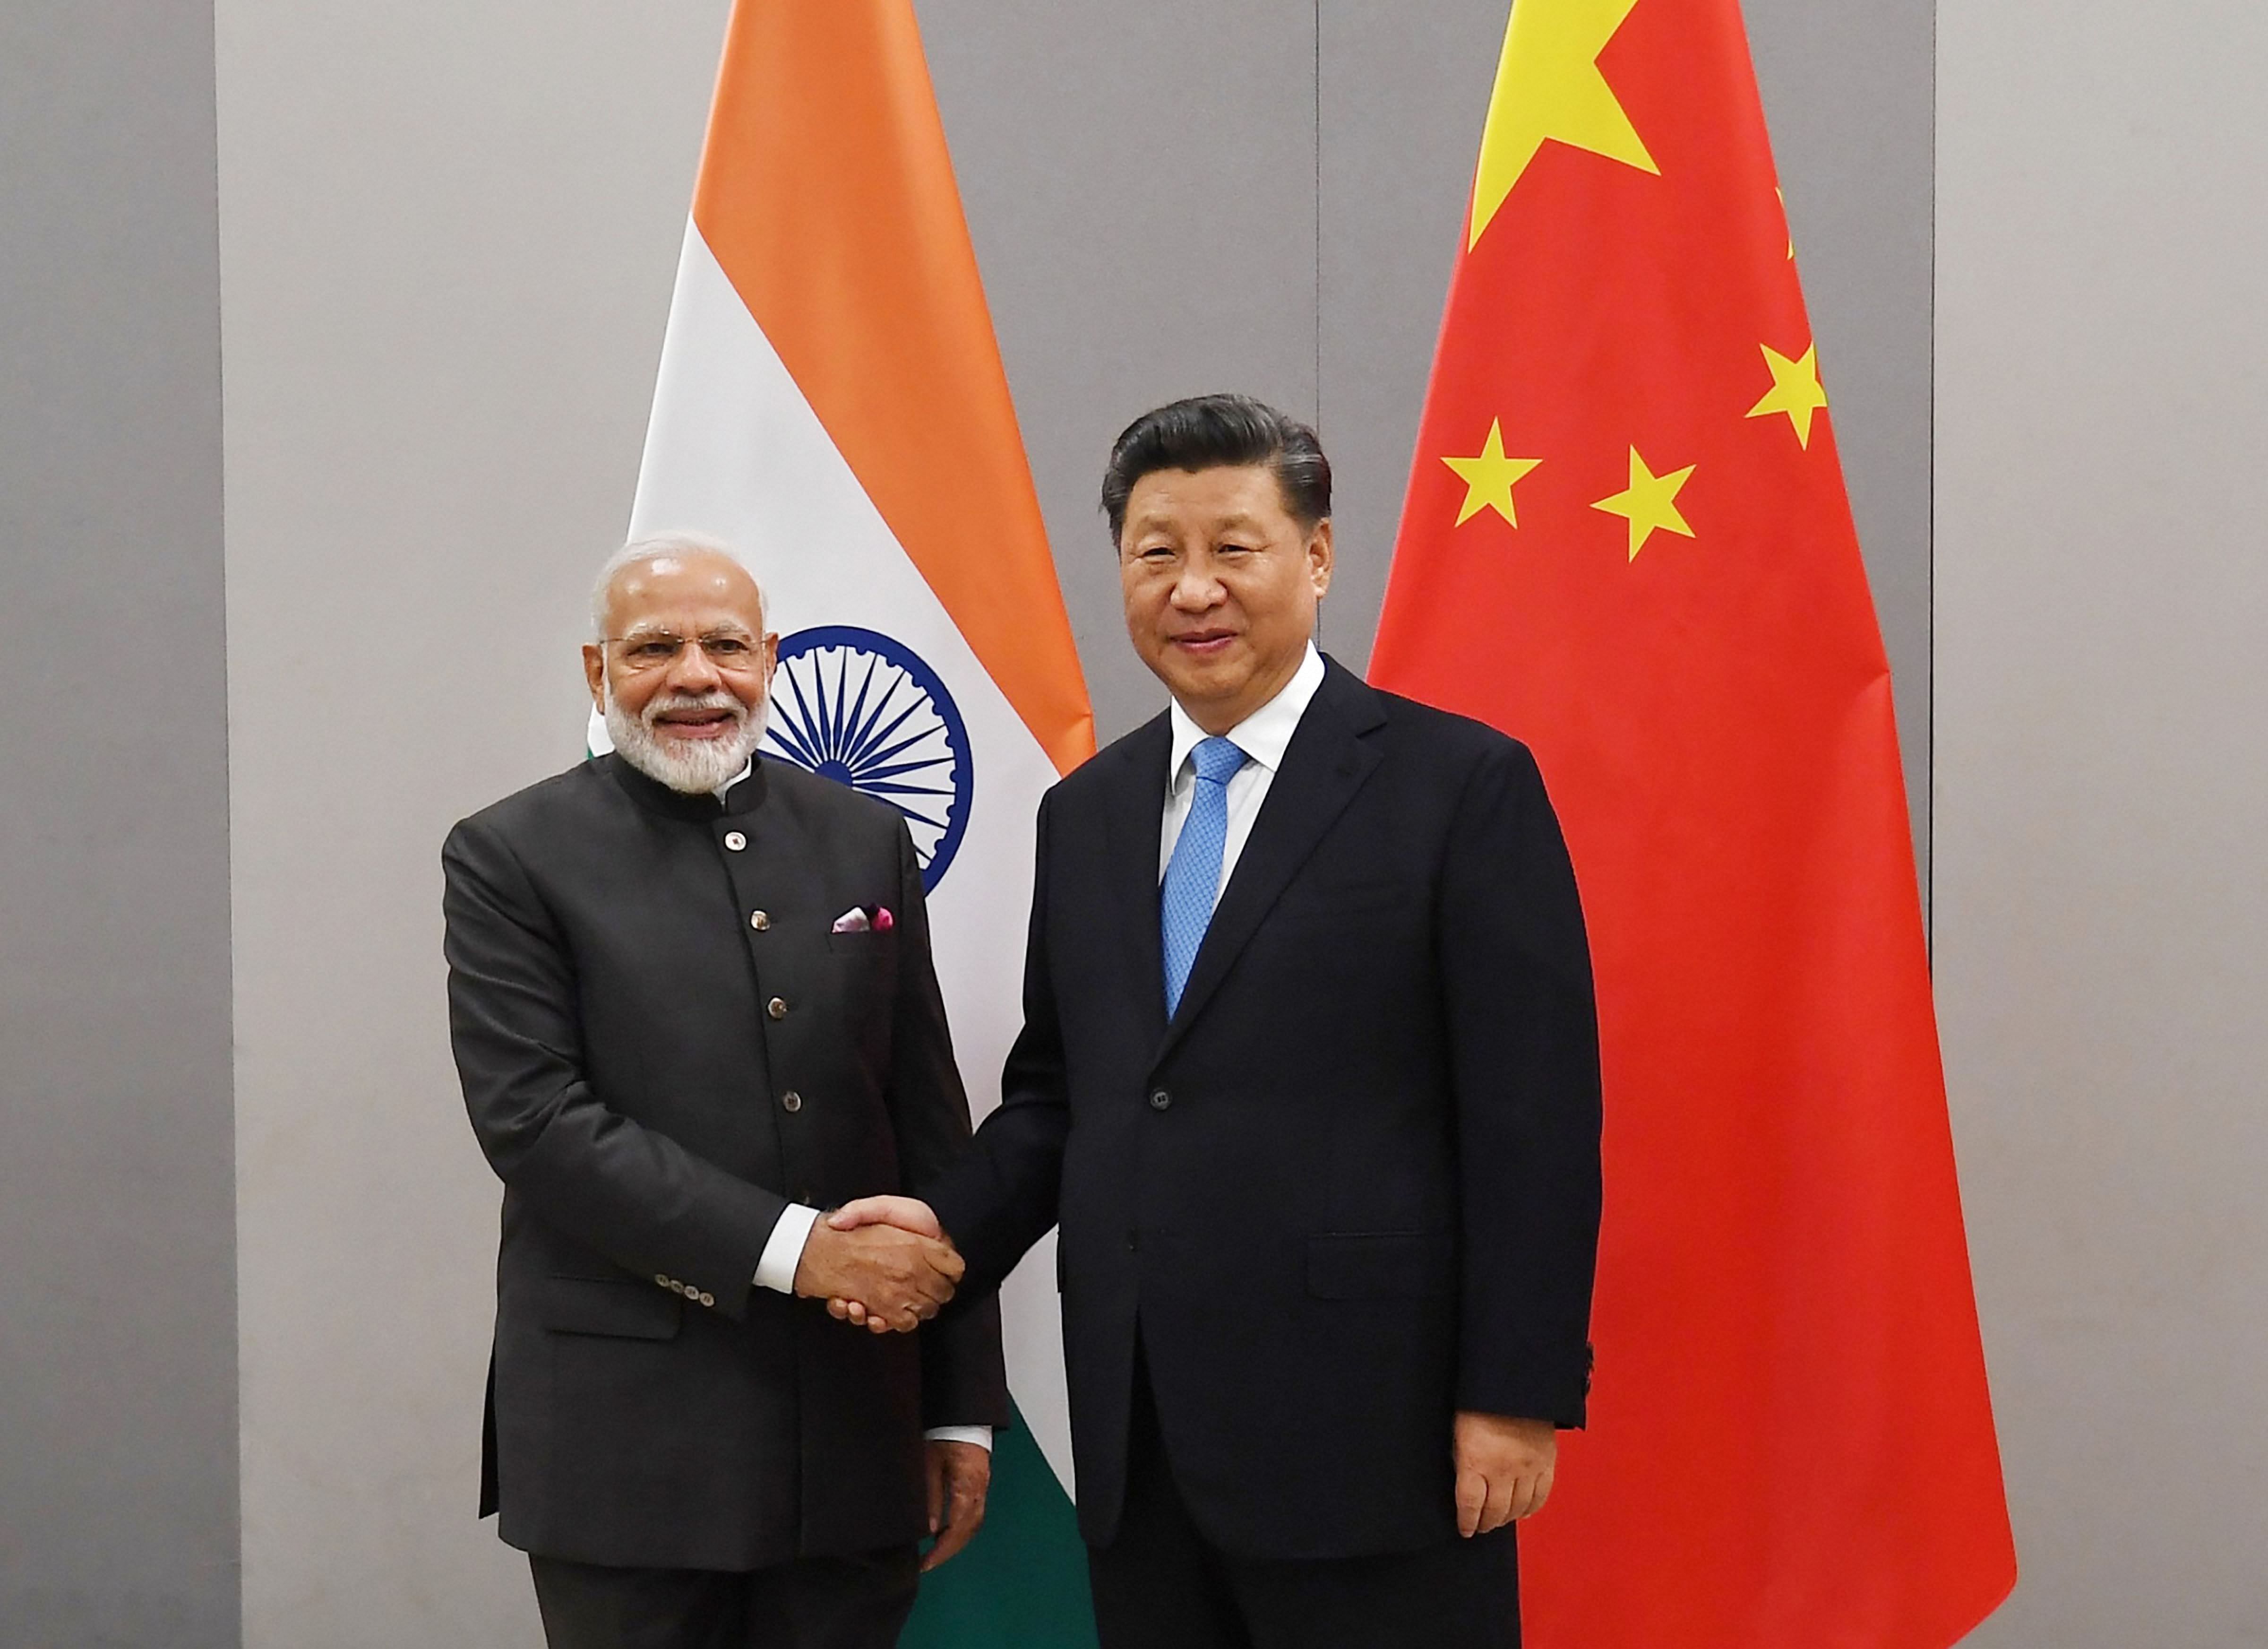 Prime Minister Narendra Modi shakes hands with Chinese President Xi Jinping. (PTI Photo)